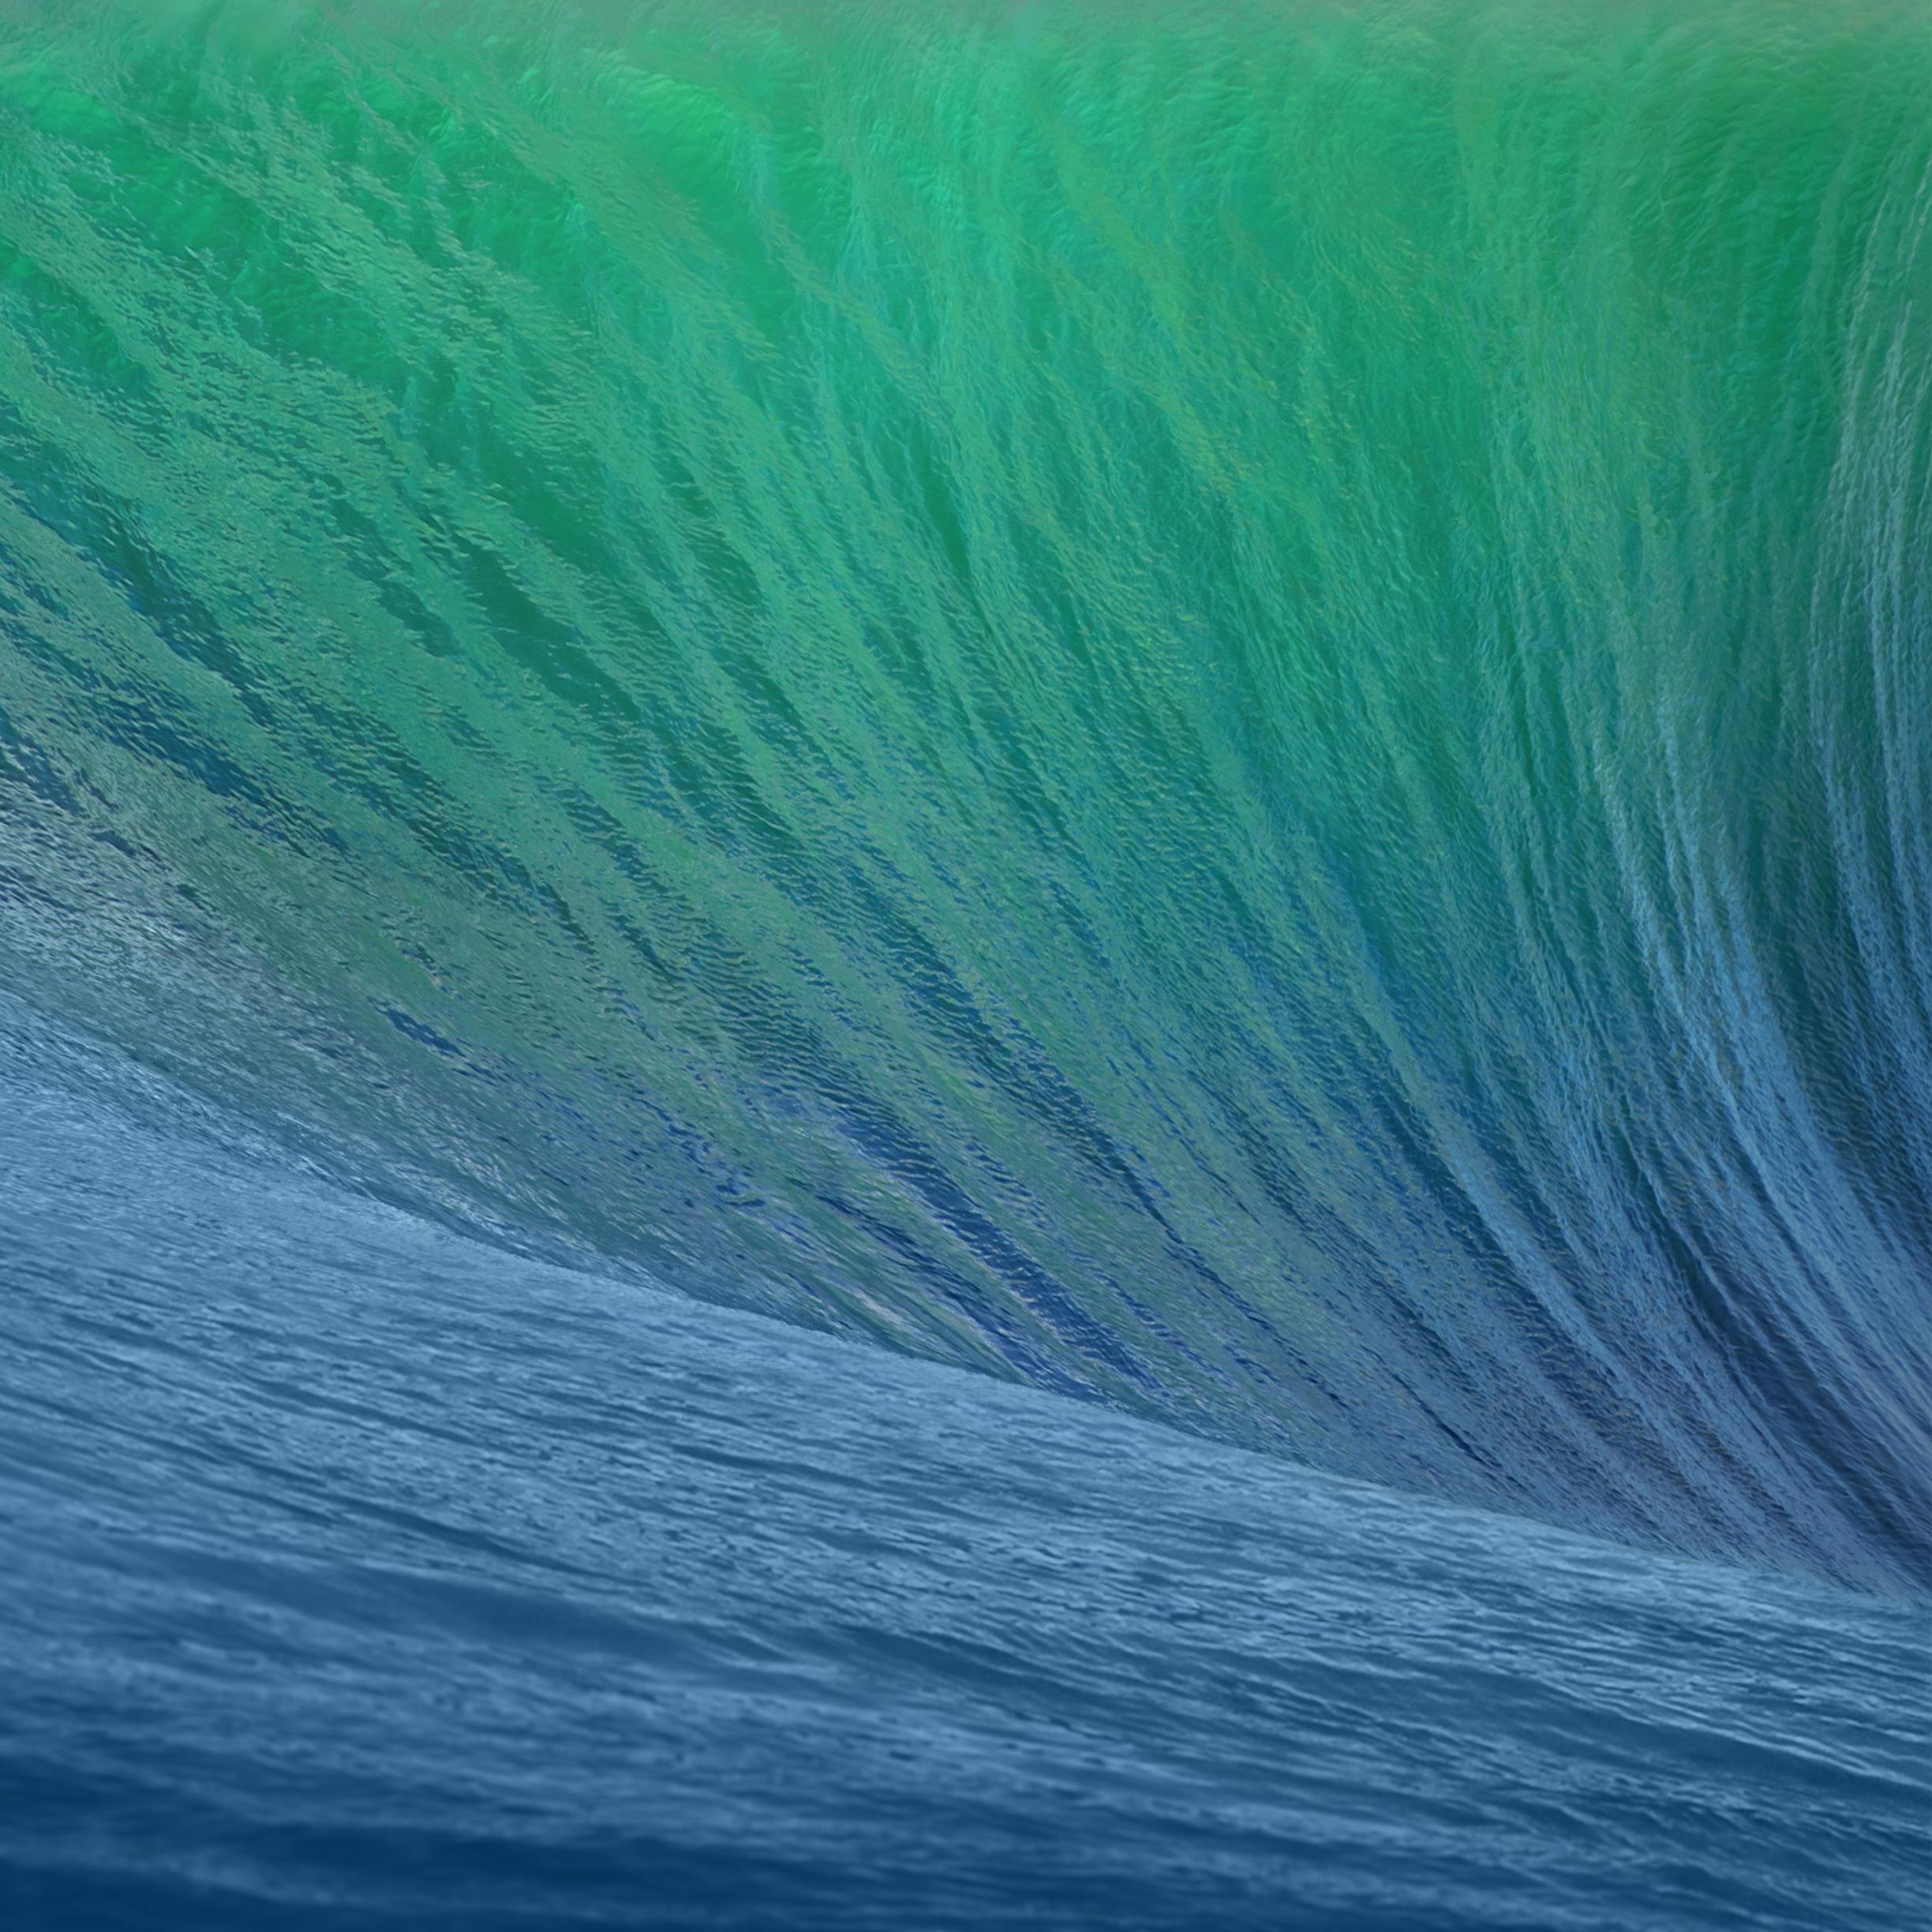 How to Get the Mavericks and iPad Air Wallpaper for Your Own Devices